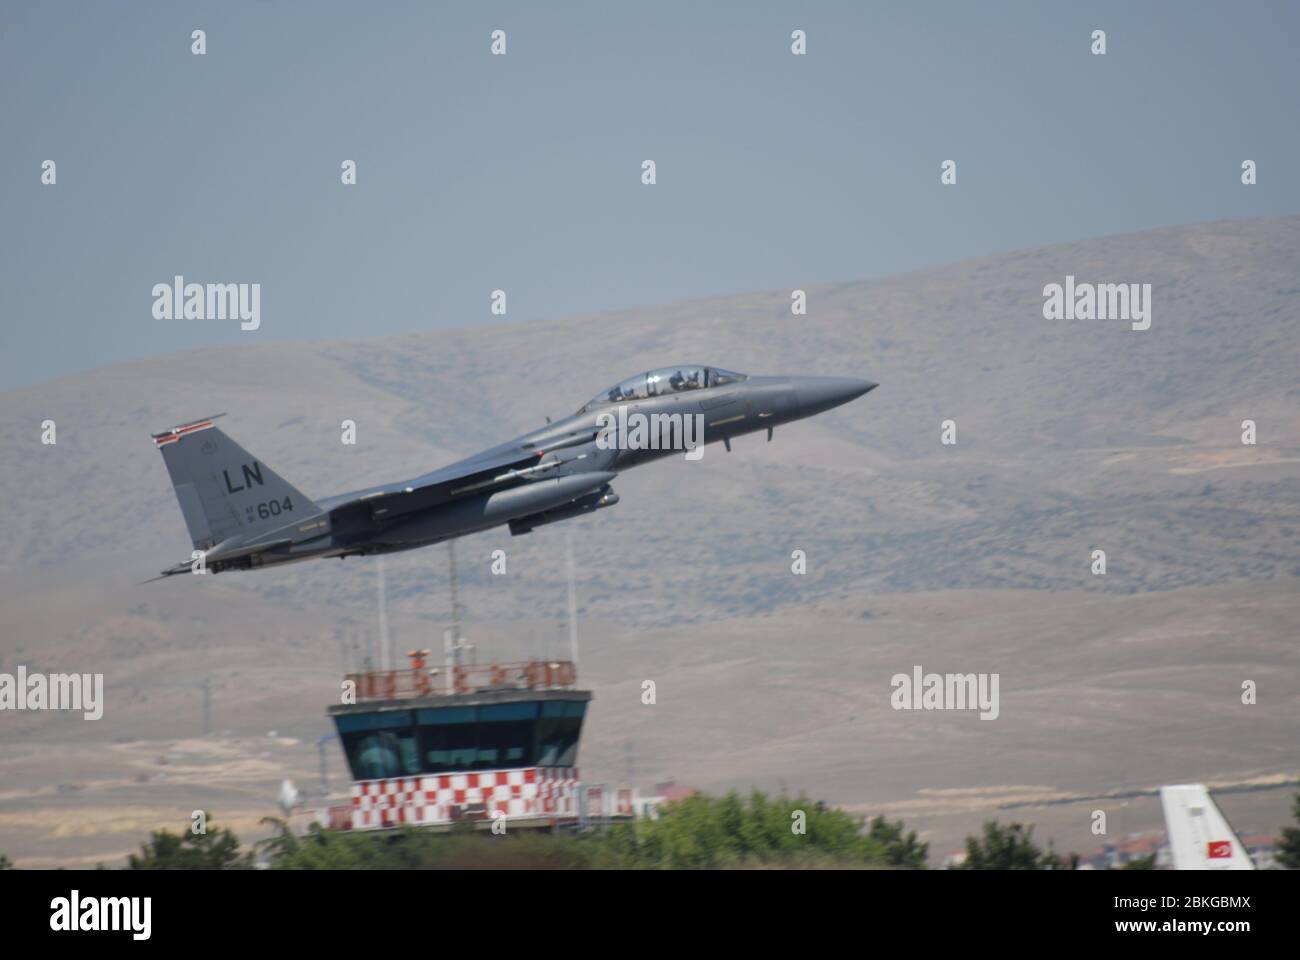 United States Air Force F-15 Strike Eagle jet fighter at takeoff from an air base during the Anatolian Eagle military exercise in Konya Stock Photo